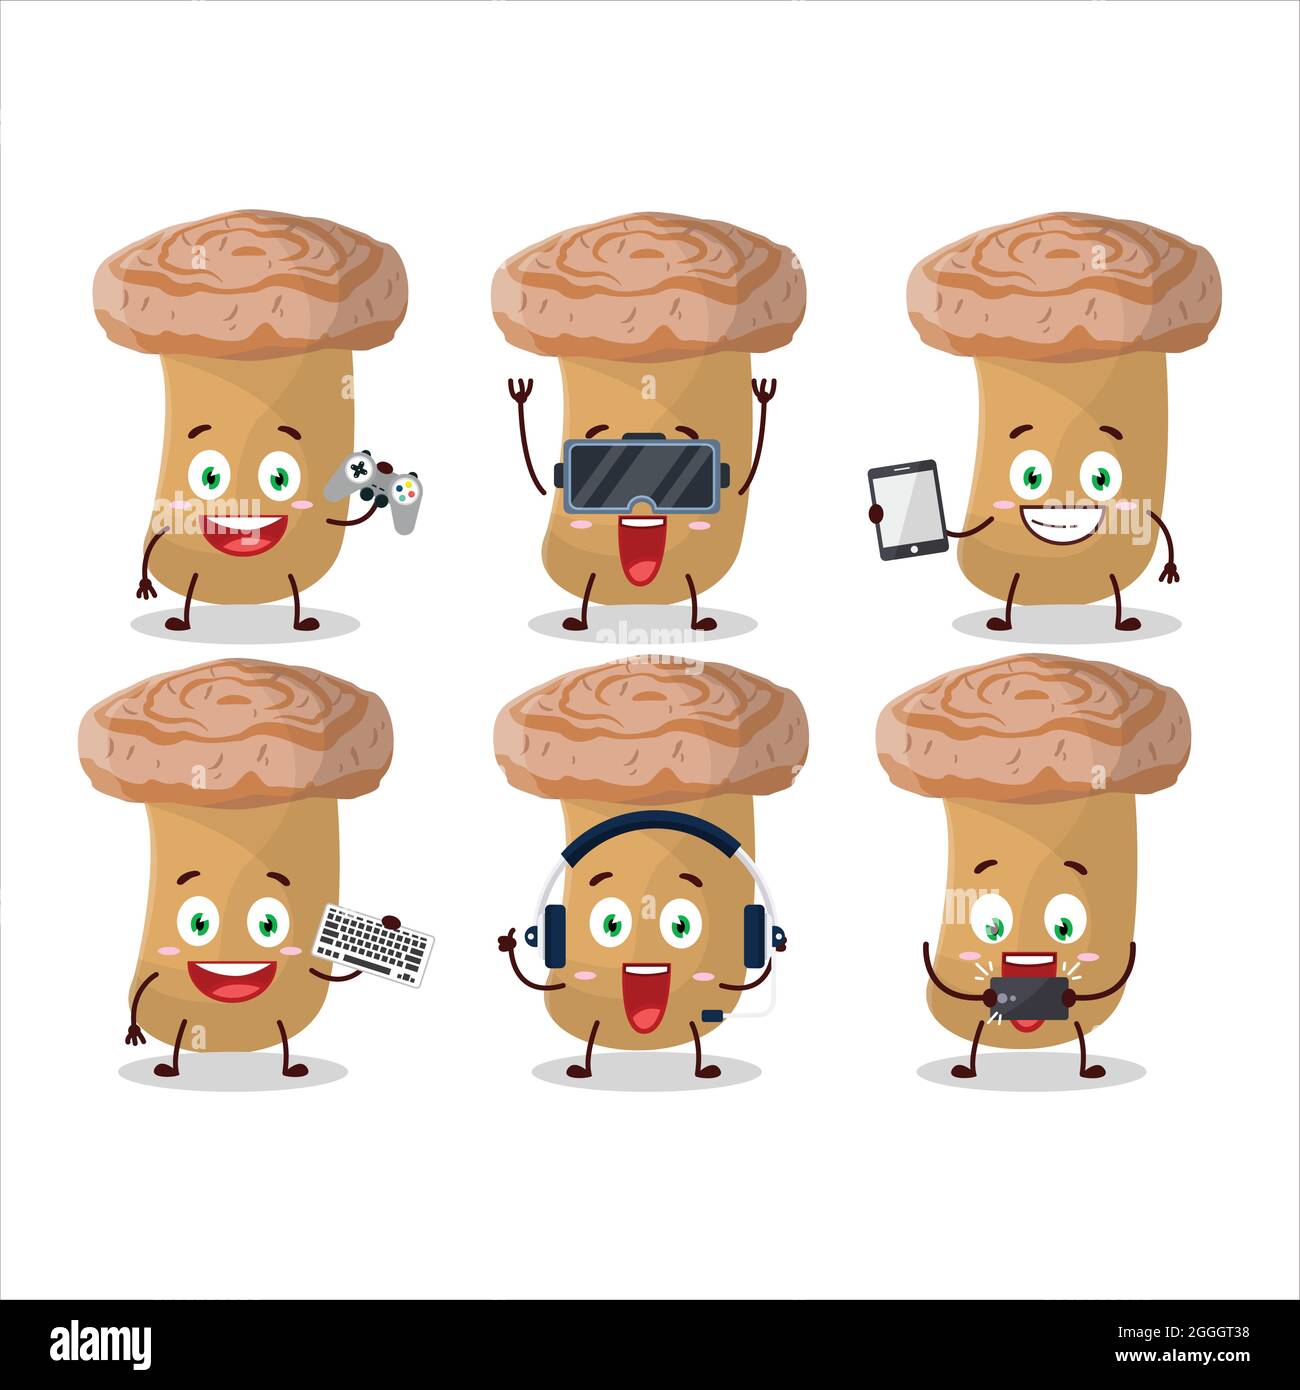 Woolly milkcap cartoon character are playing games with various cute emoticons. Vector illustration Stock Vector